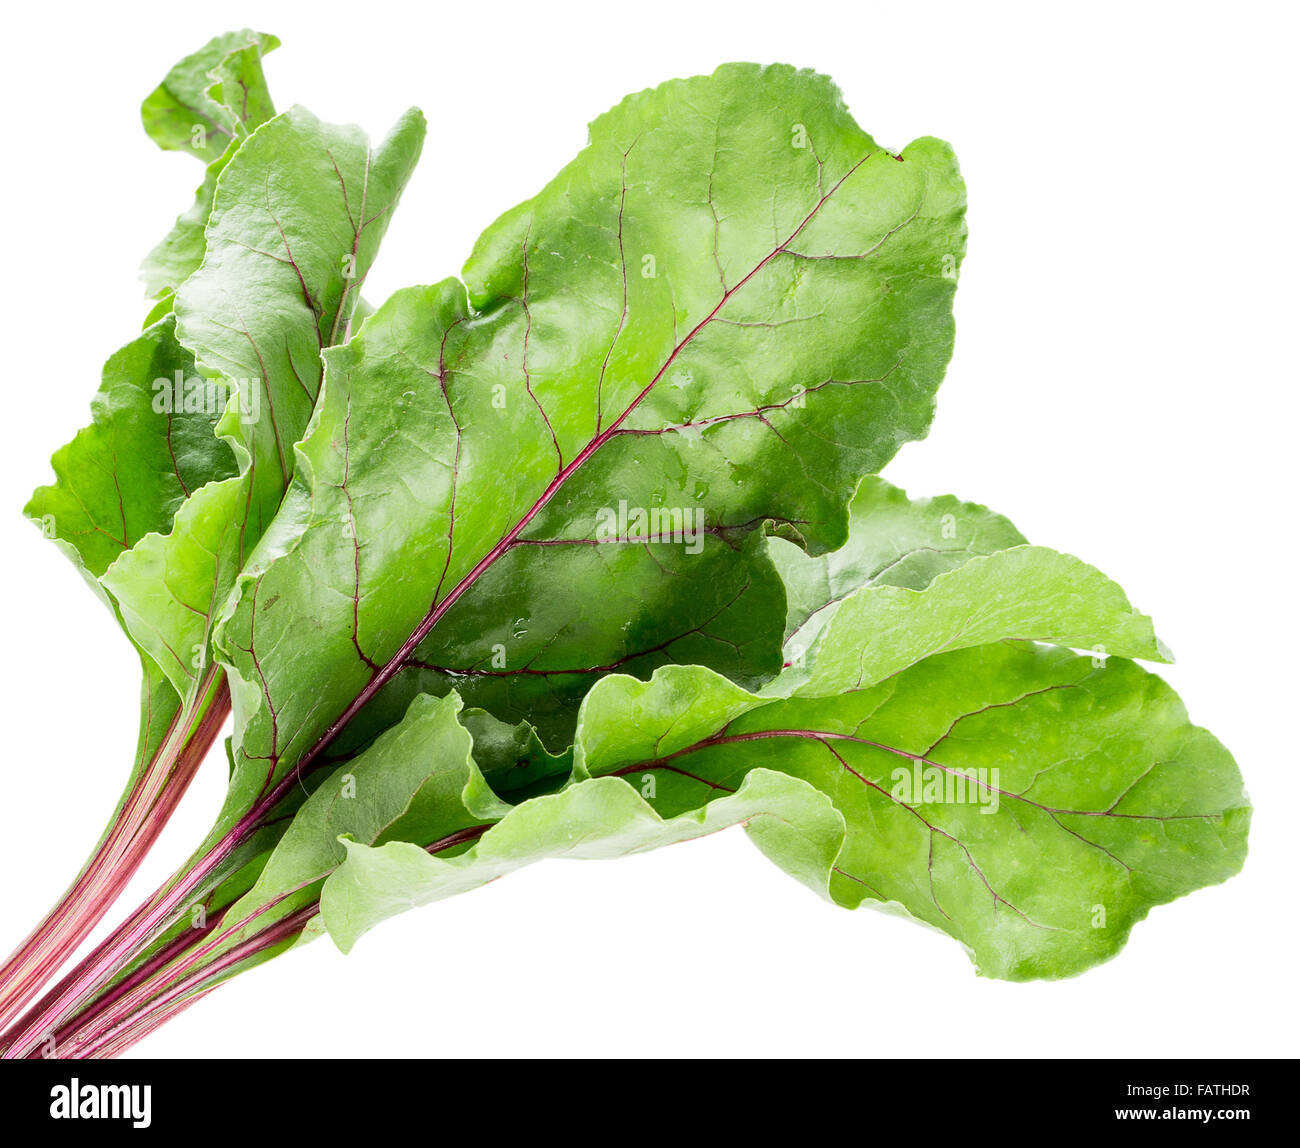 beet leaves isolated on the white background. Stock Photo